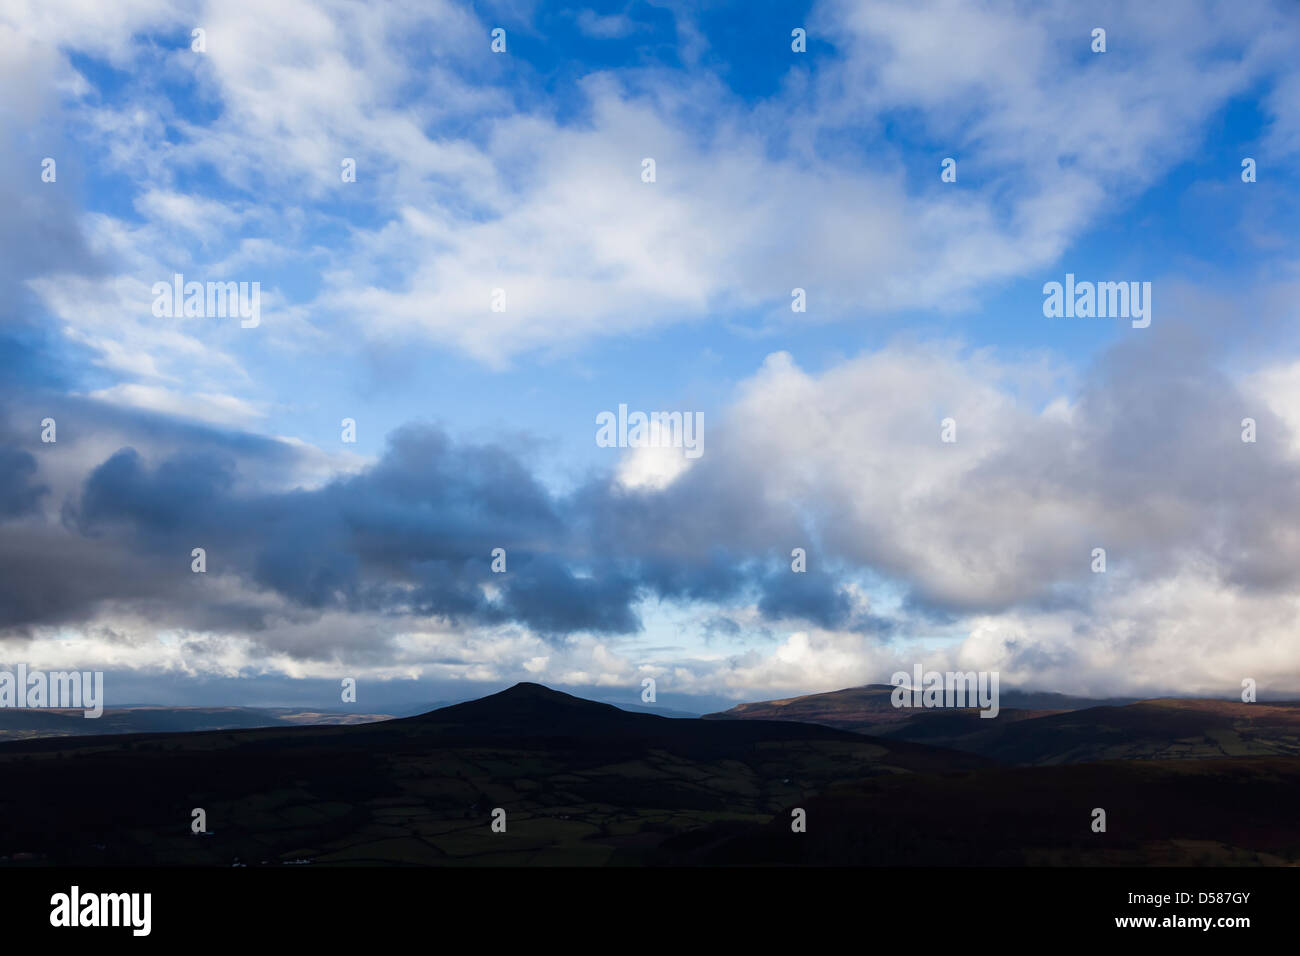 Sugar Loaf mountain in silhouette with clouds, Wales, UK Stock Photo